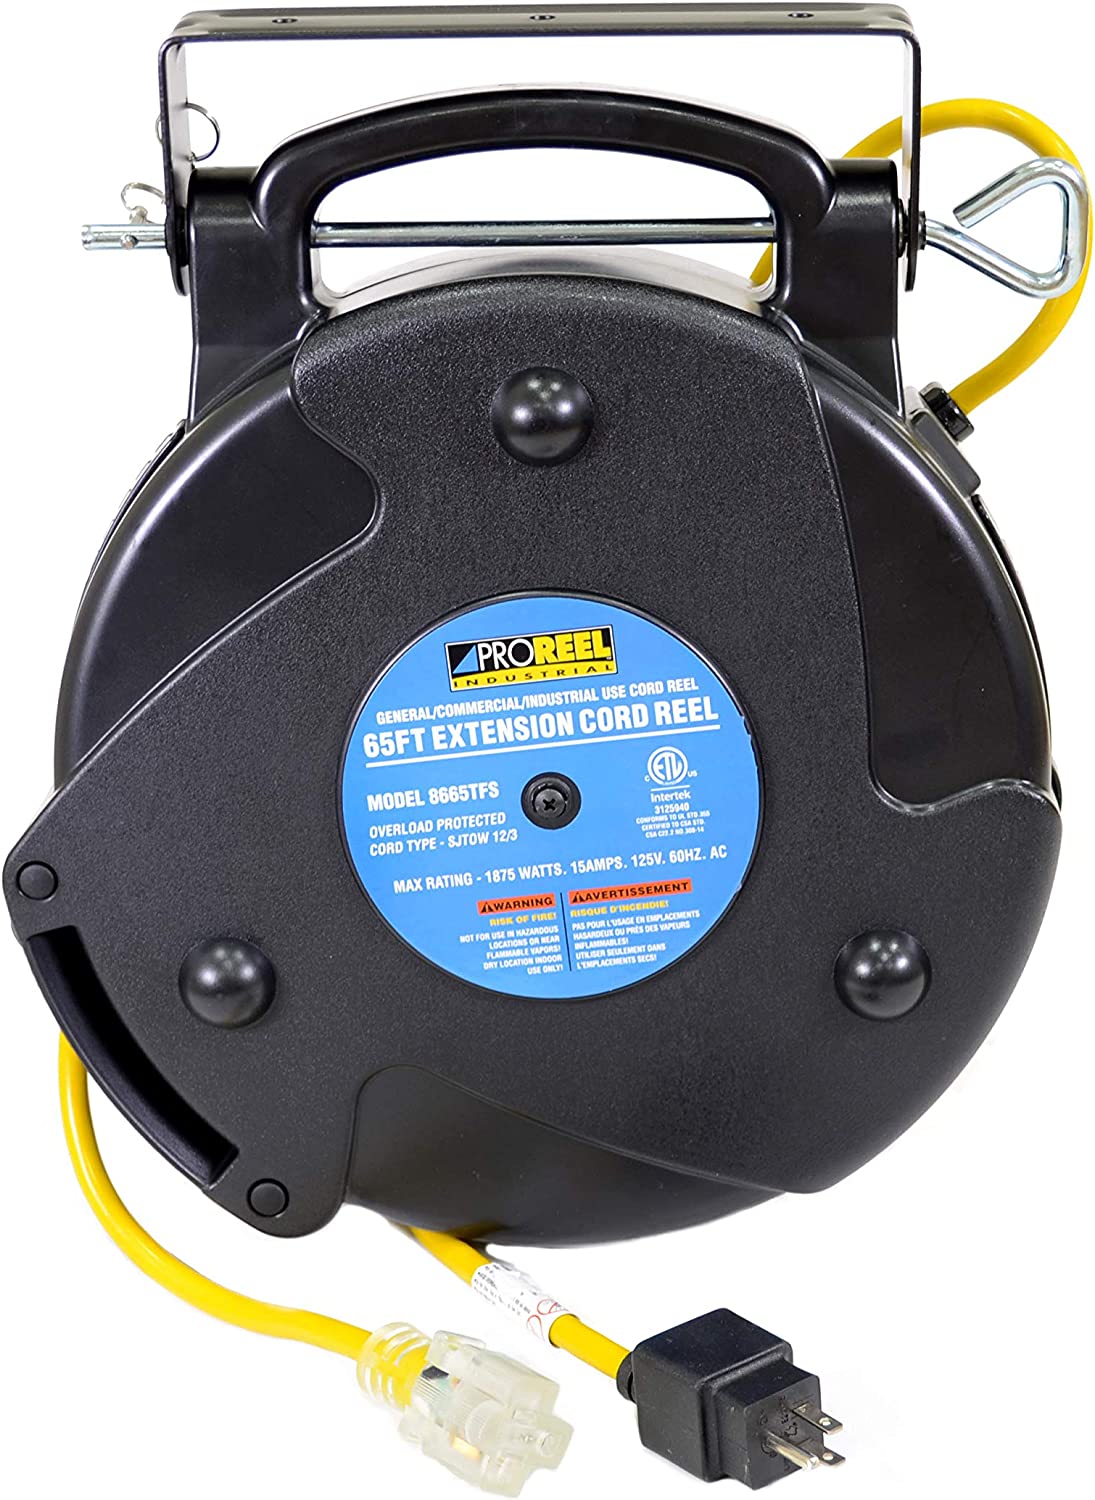 Retractable Extension Cord | 65 Foot Single Tap Industrial Retractable Extension Cord Reel - E.S.N Tools